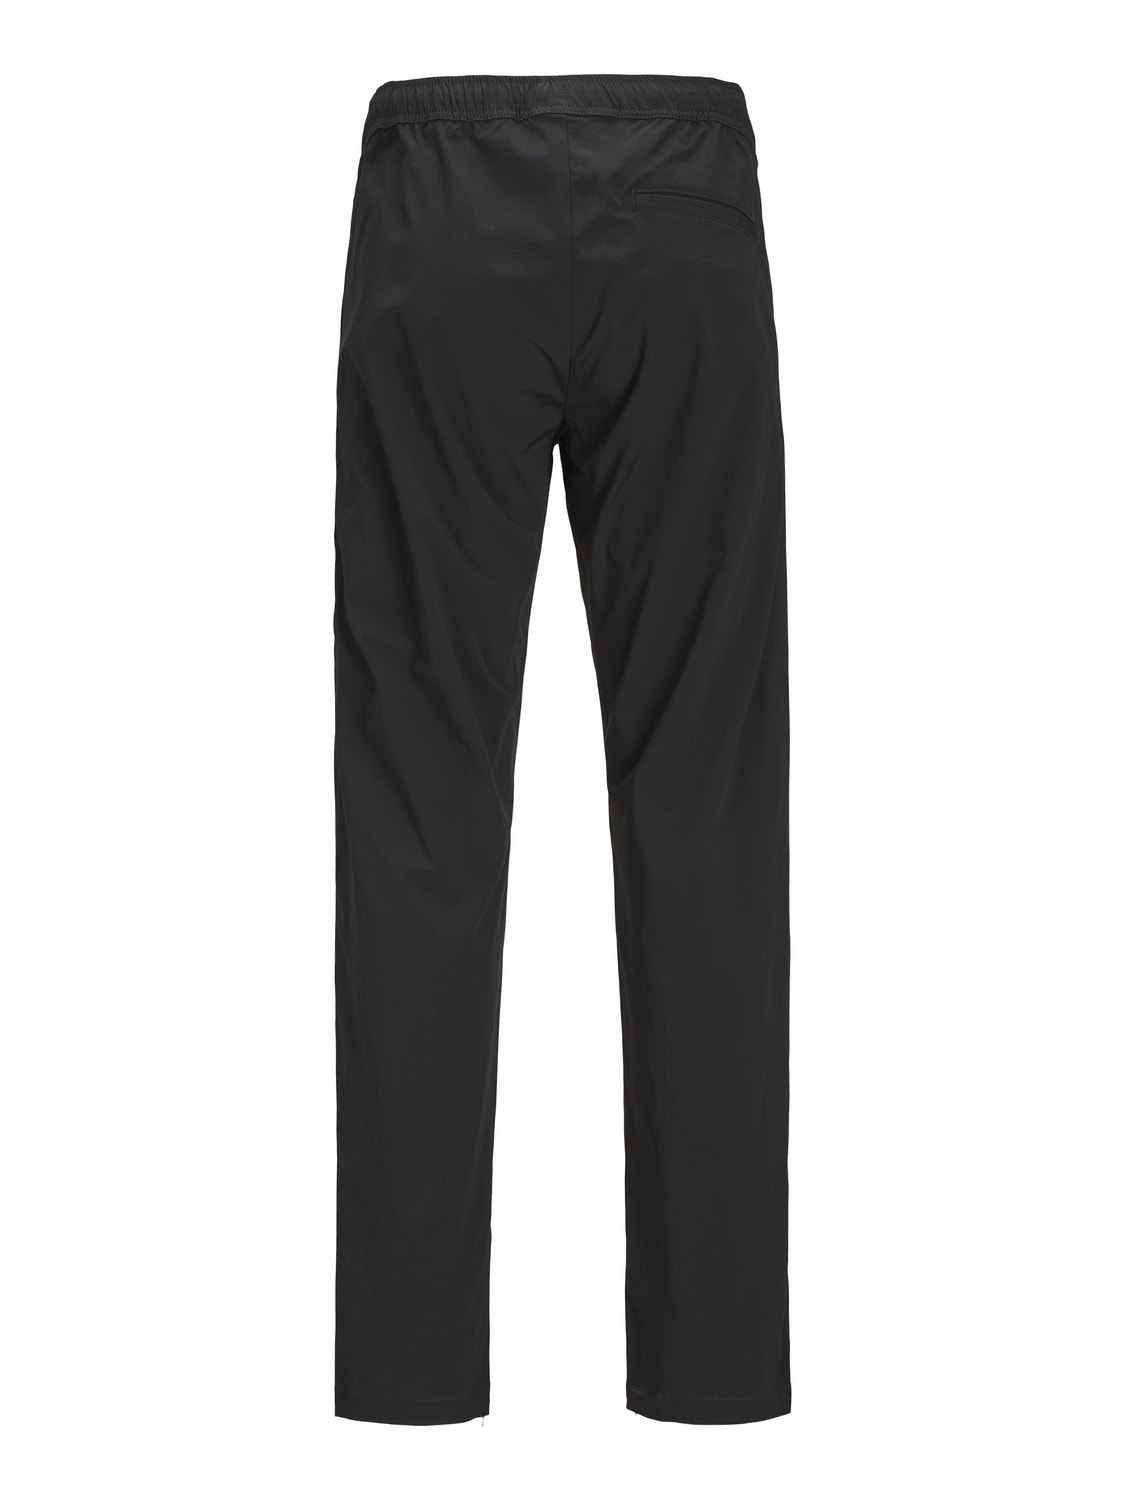 Jack & Jones Relaxed Fit Chino trousers -Black - 12250741